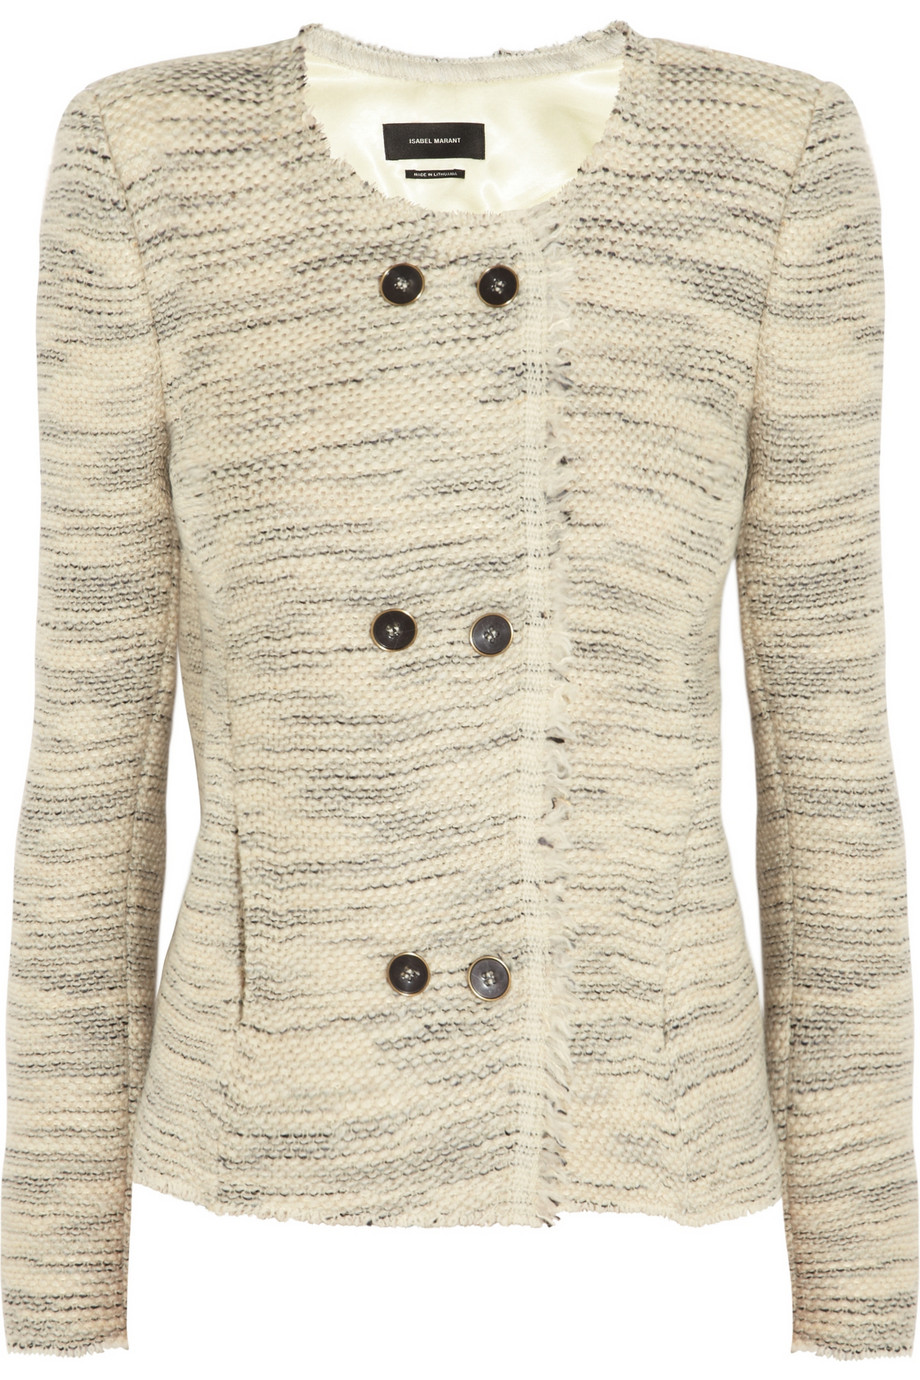 Lyst - Isabel Marant Laure Woven Woolblend Jacket in Natural